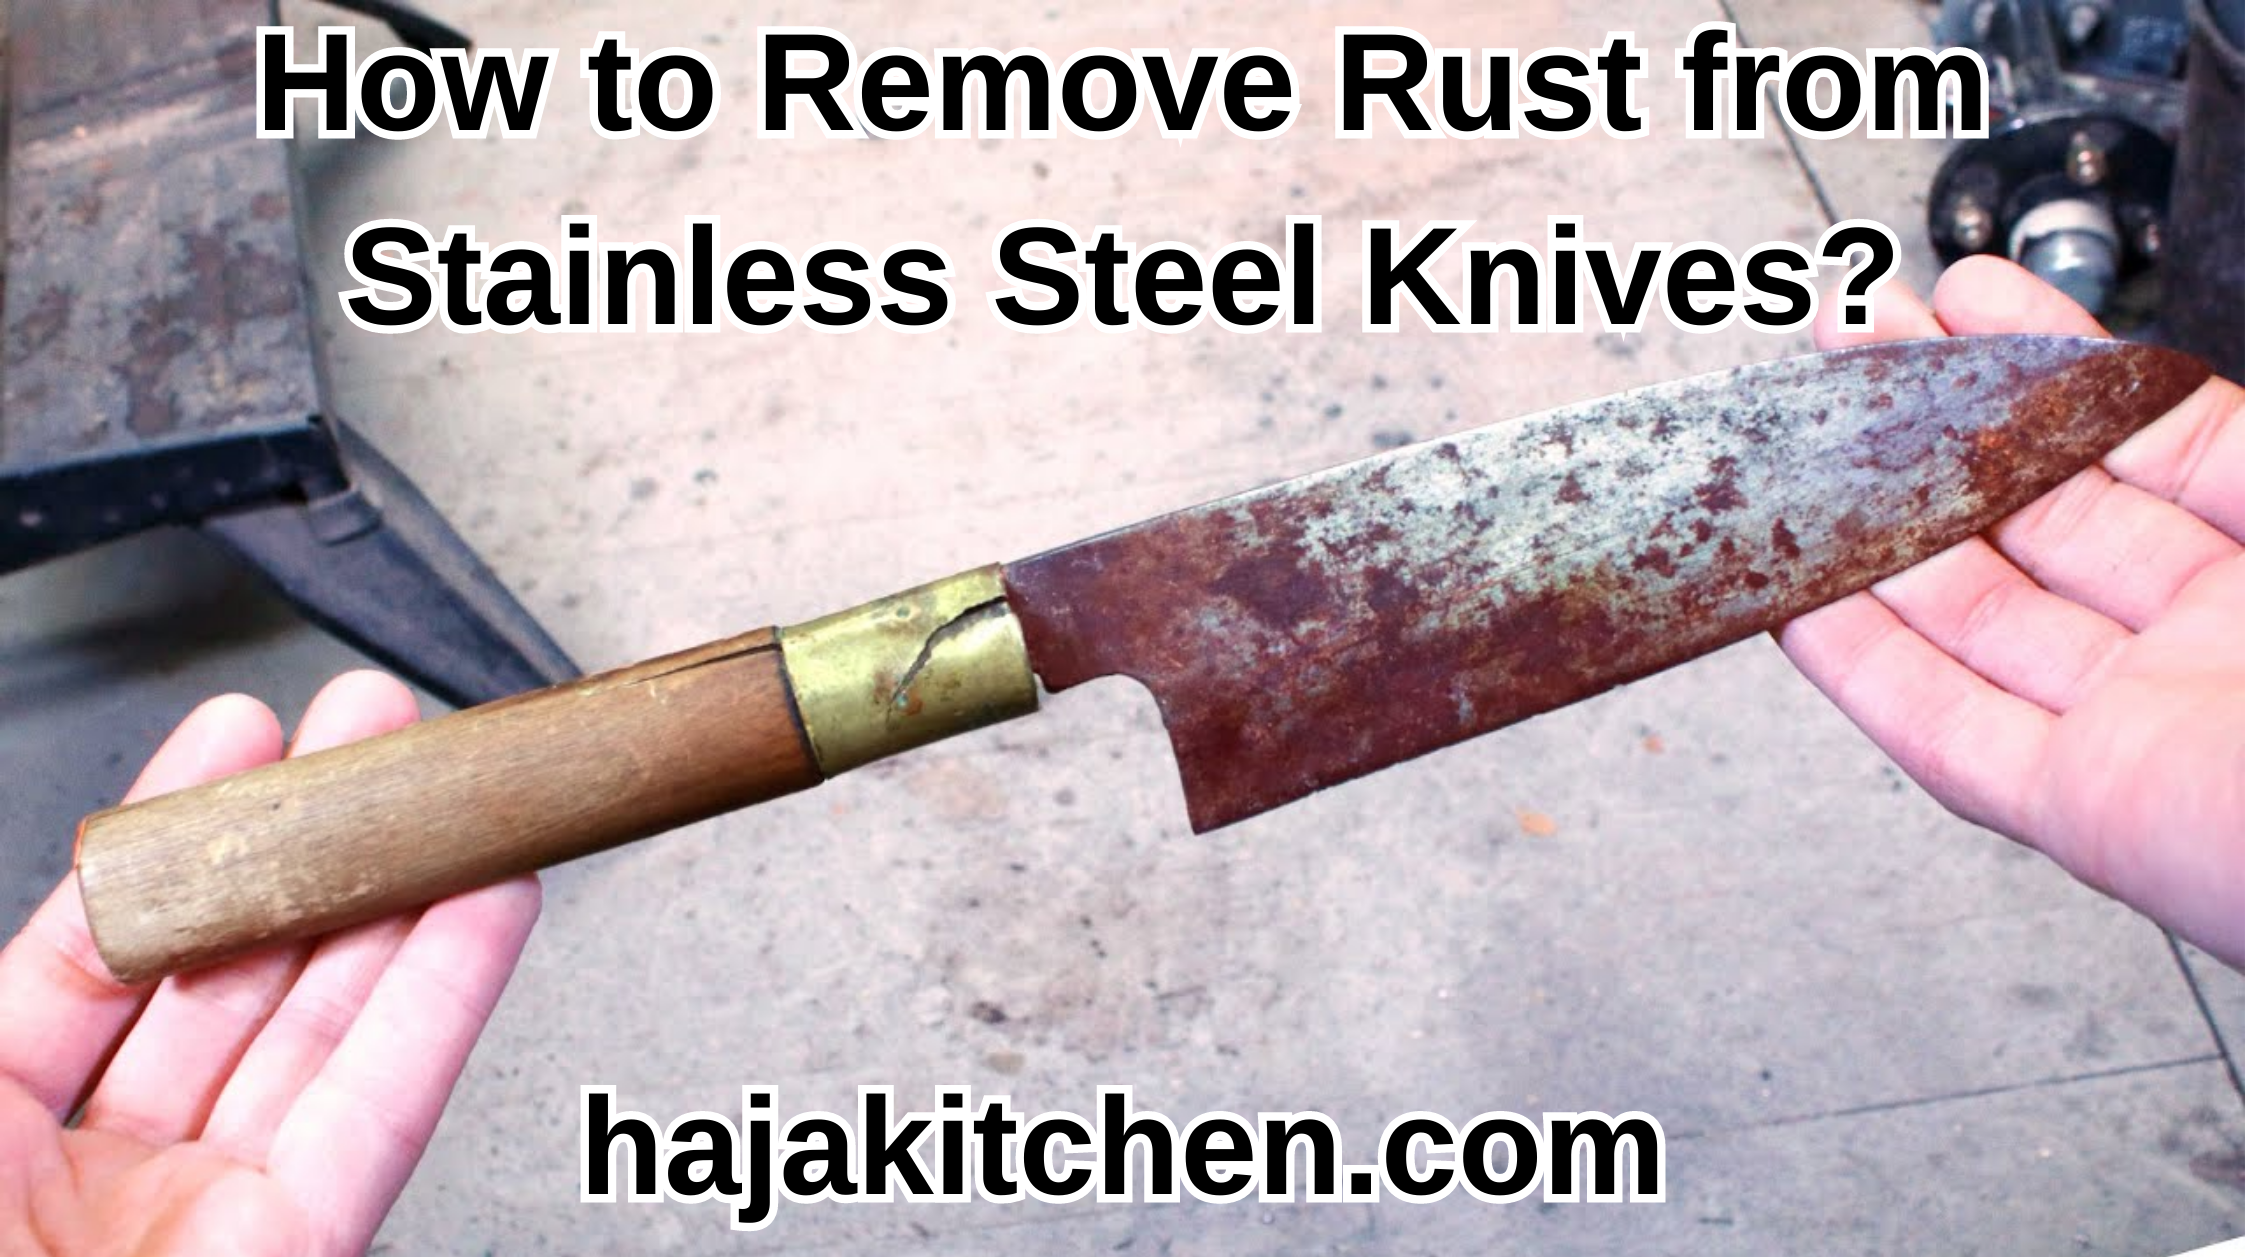 How to Remove Rust from Stainless Steel Knives